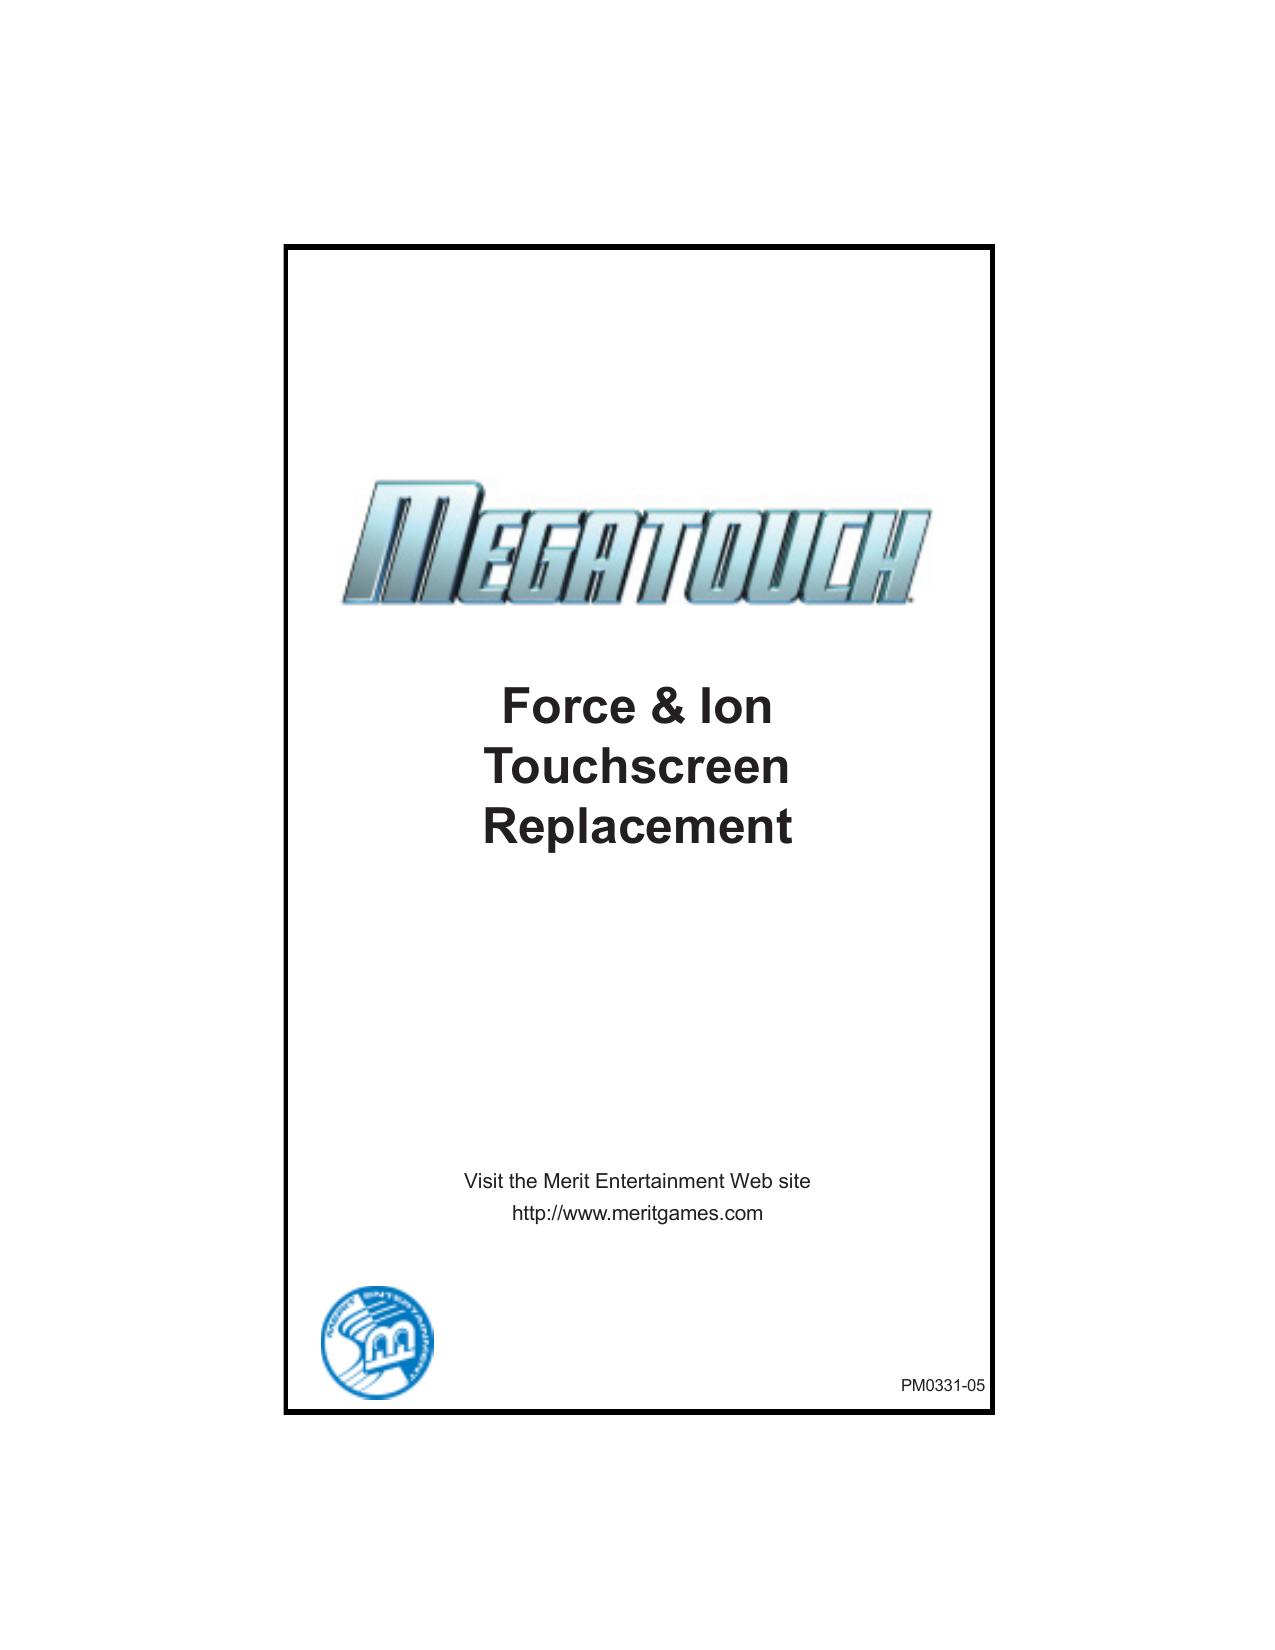 PM0331-05 Ion and Force Touchscreen Replacement_unreleased.pmd